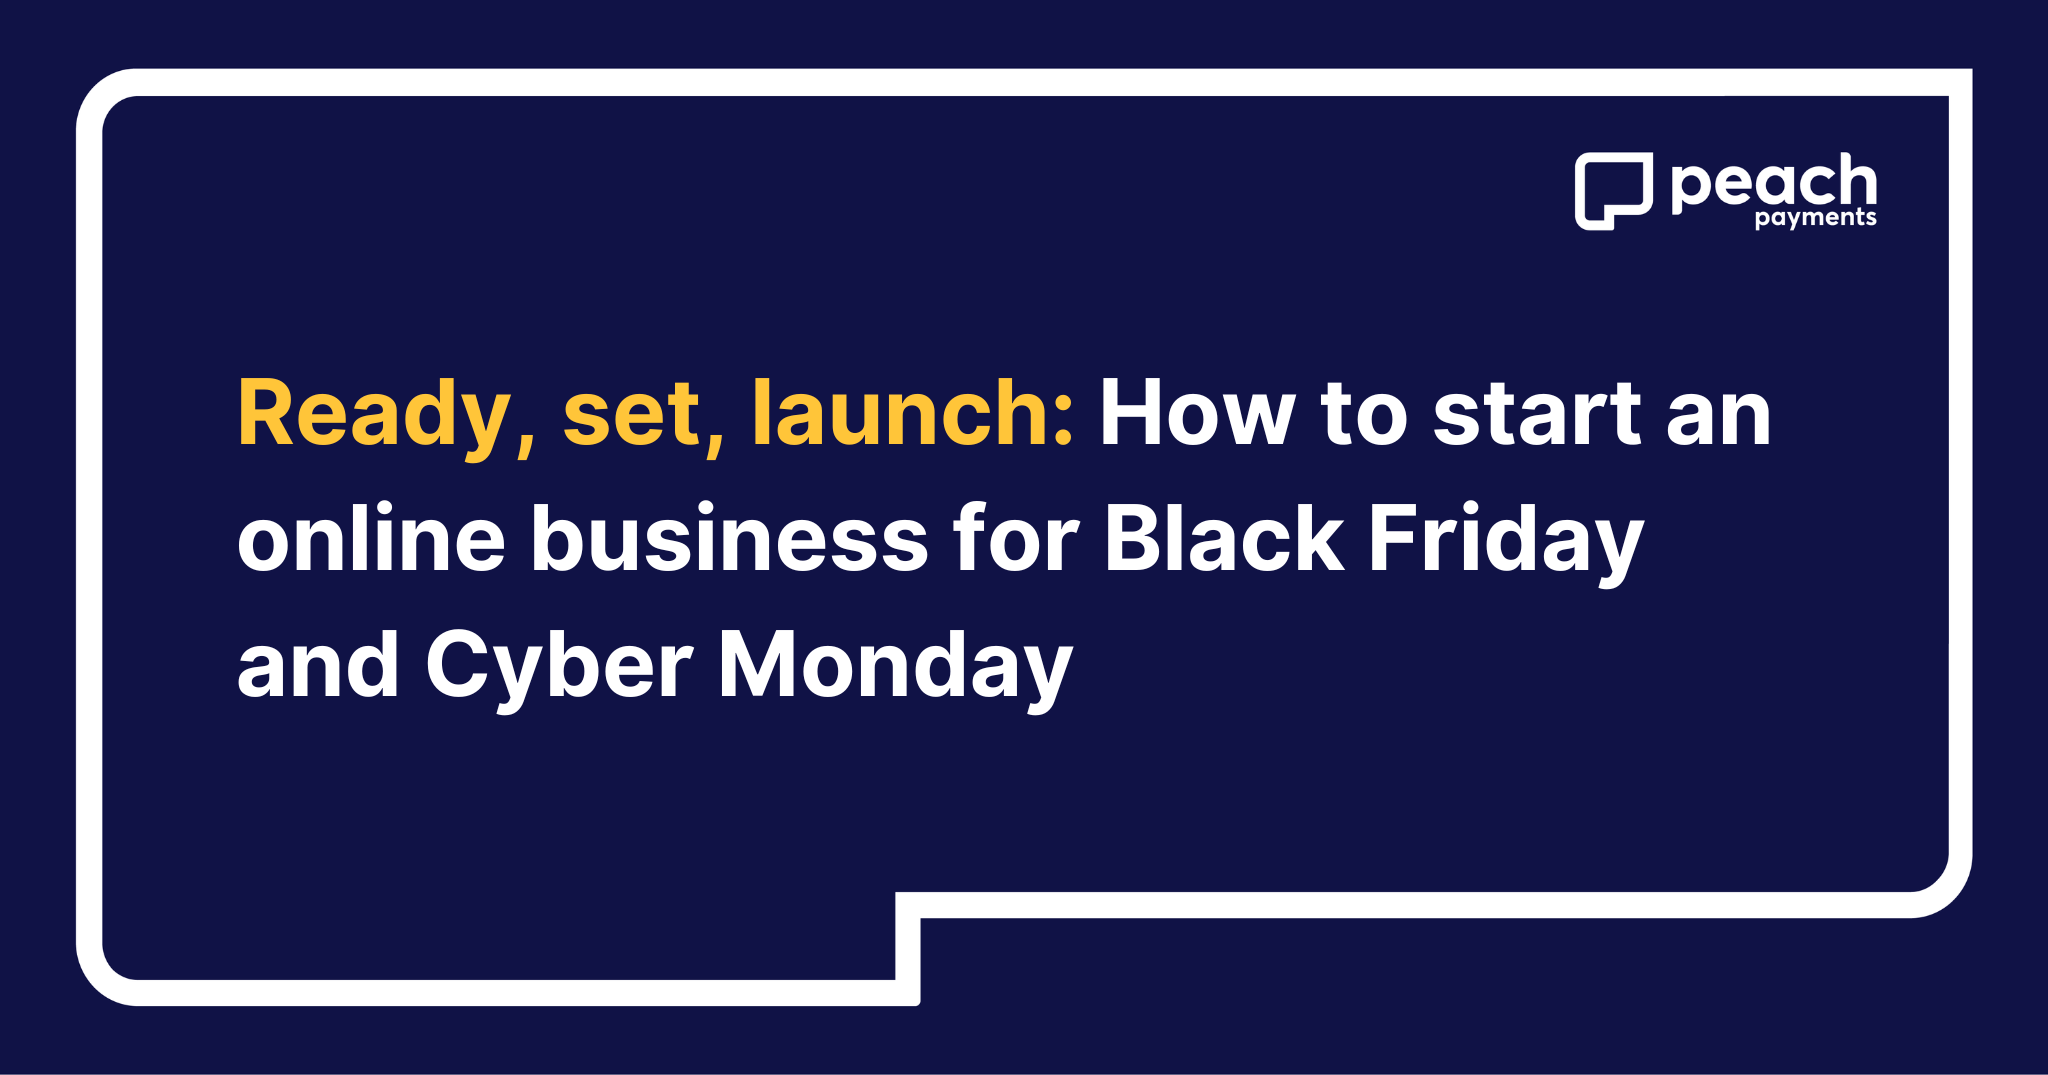 Ready, set, launch: How to start an online business for Black Friday and Cyber Monday